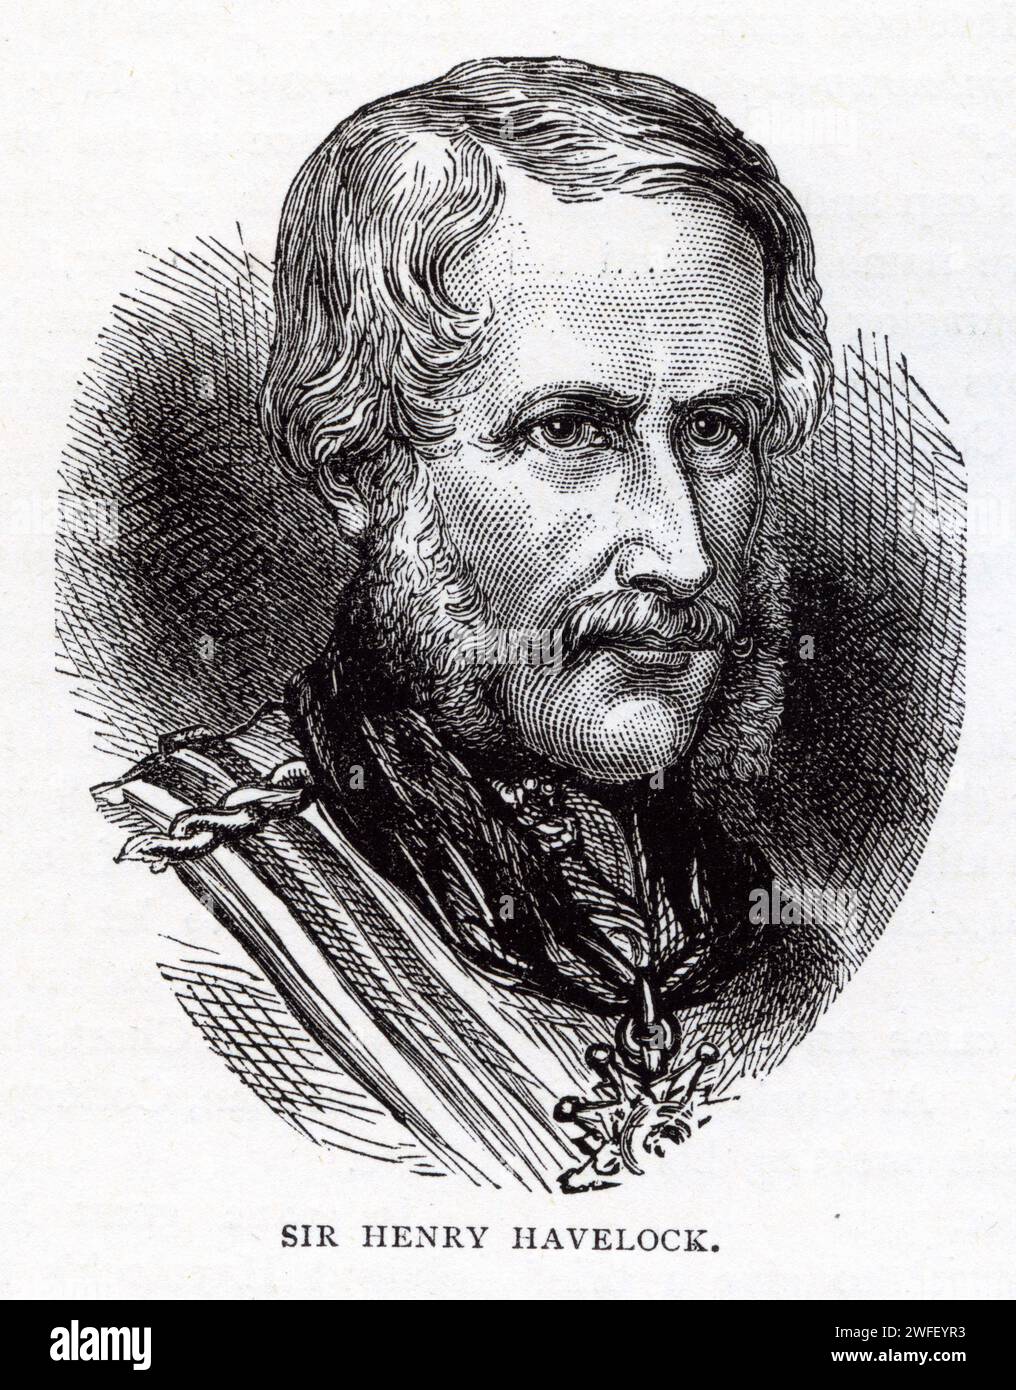 Portrait of Sir Henry Havelock. Published circa 1900. Haavelock (1795-1857) was a British Army General who led his men against Nana Sahib at Futtyporer (Fatephur) in 1857 during the Indian Mutiny. Stock Photo